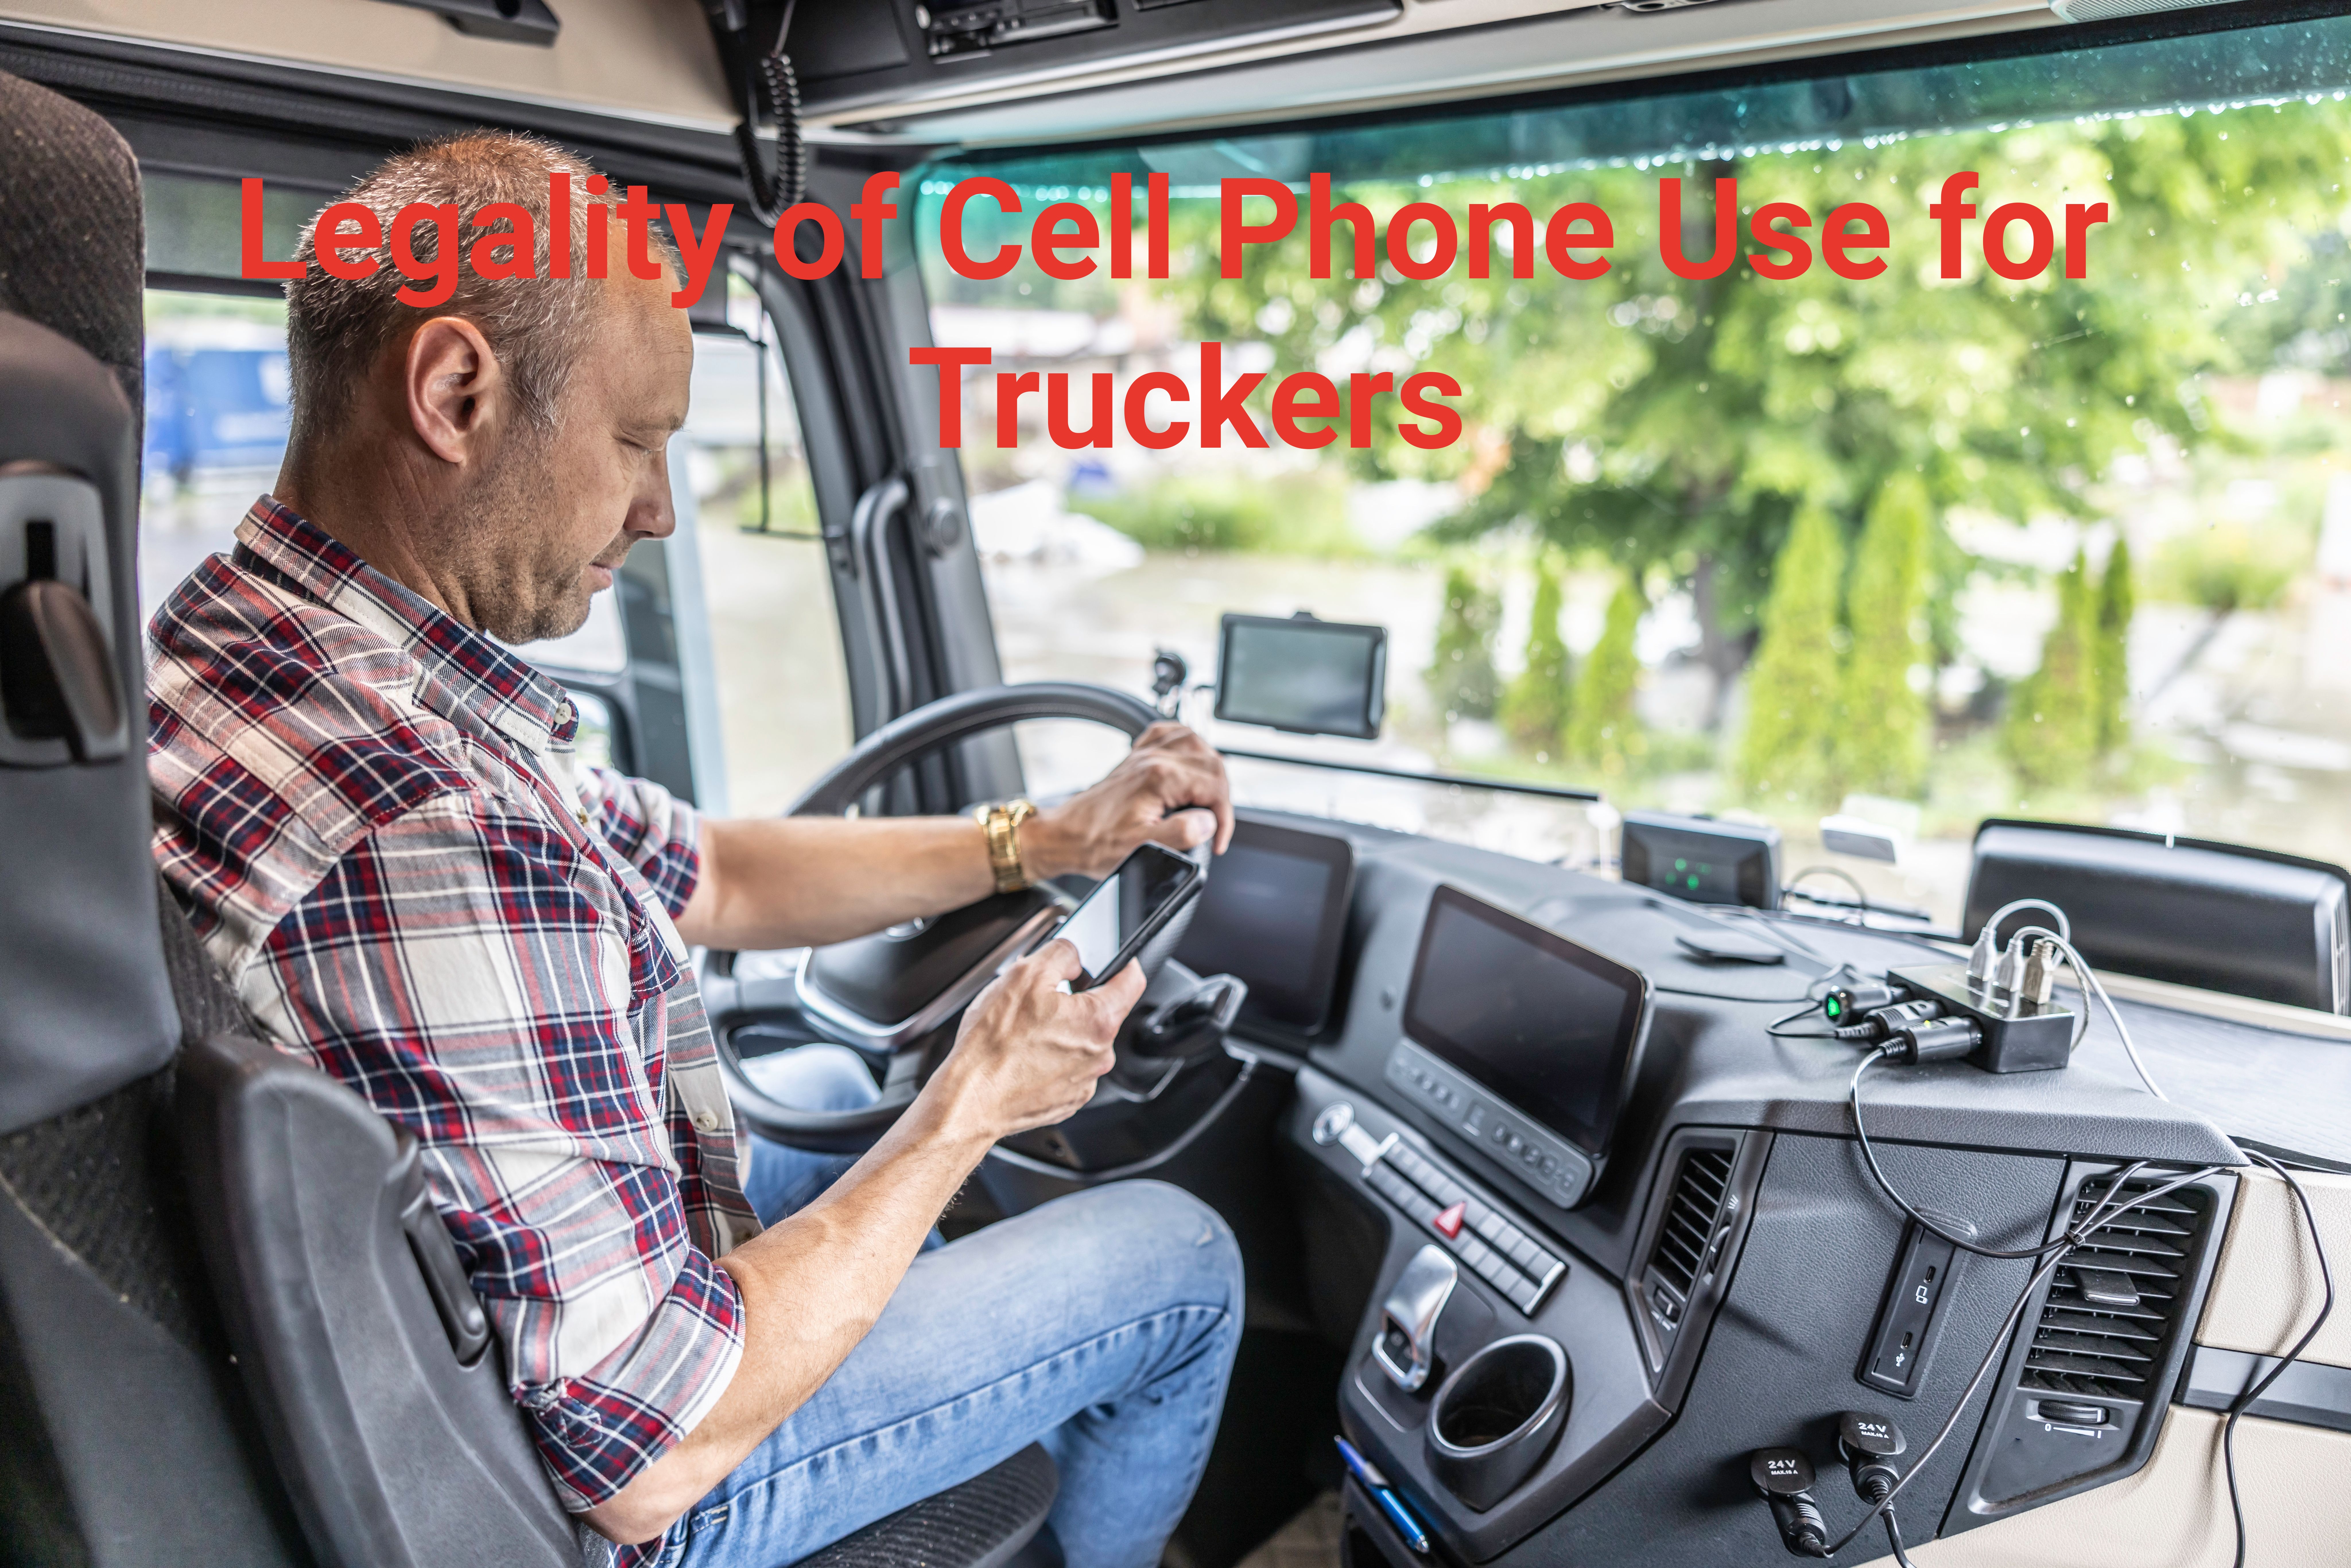 Cell phone use by Truckers